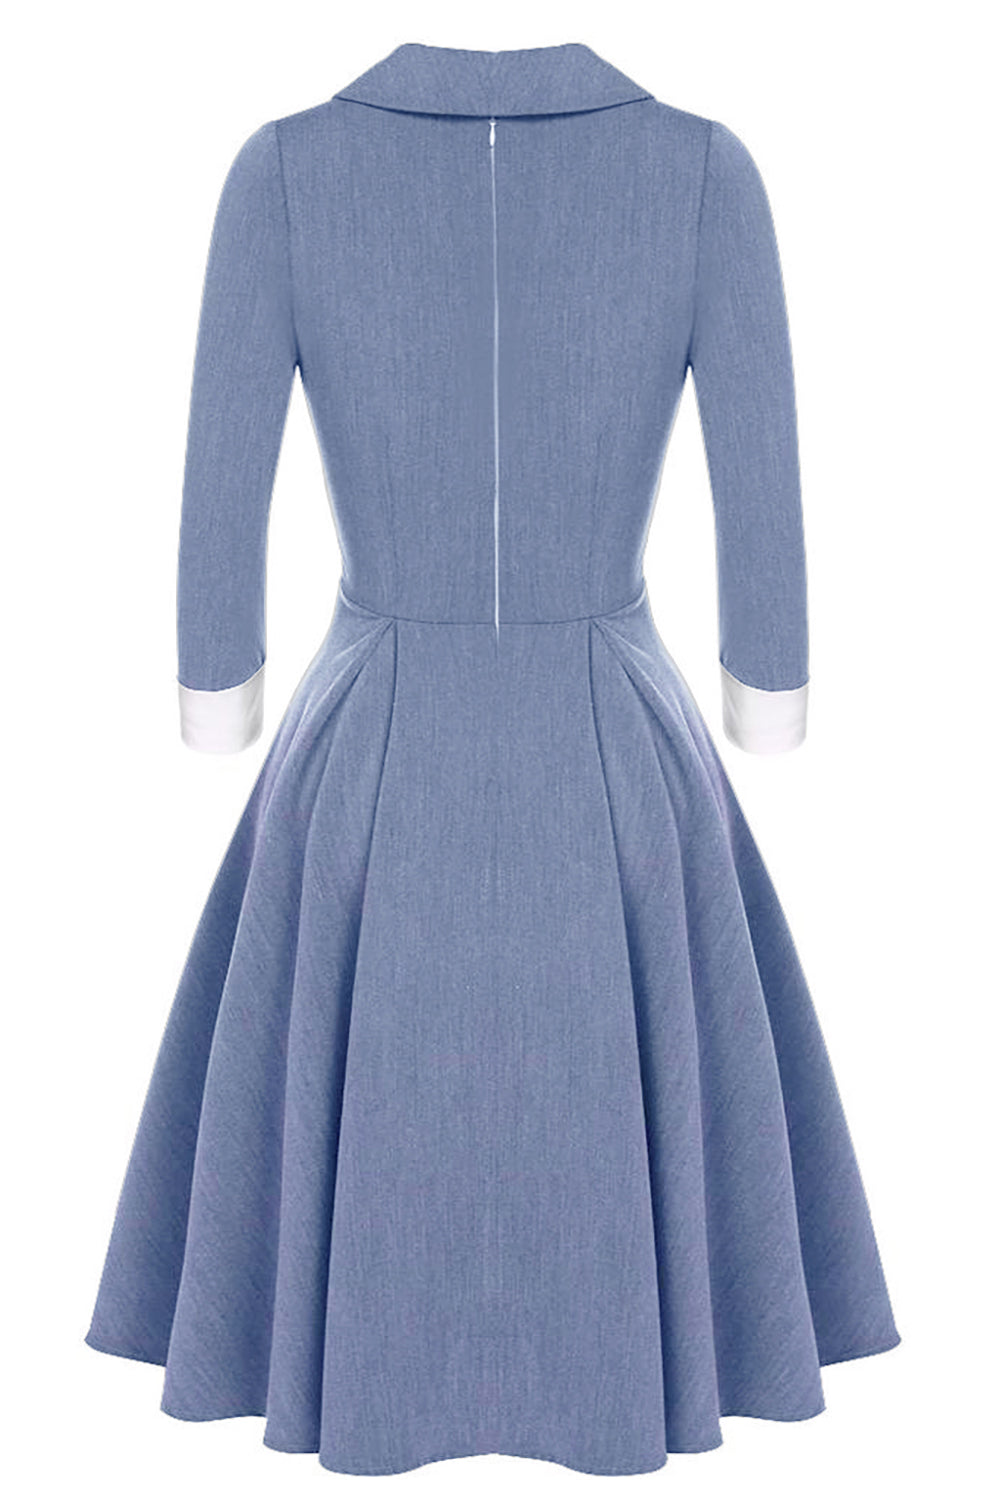 Grey Blue 1950s Swing Dress with Long Sleeves